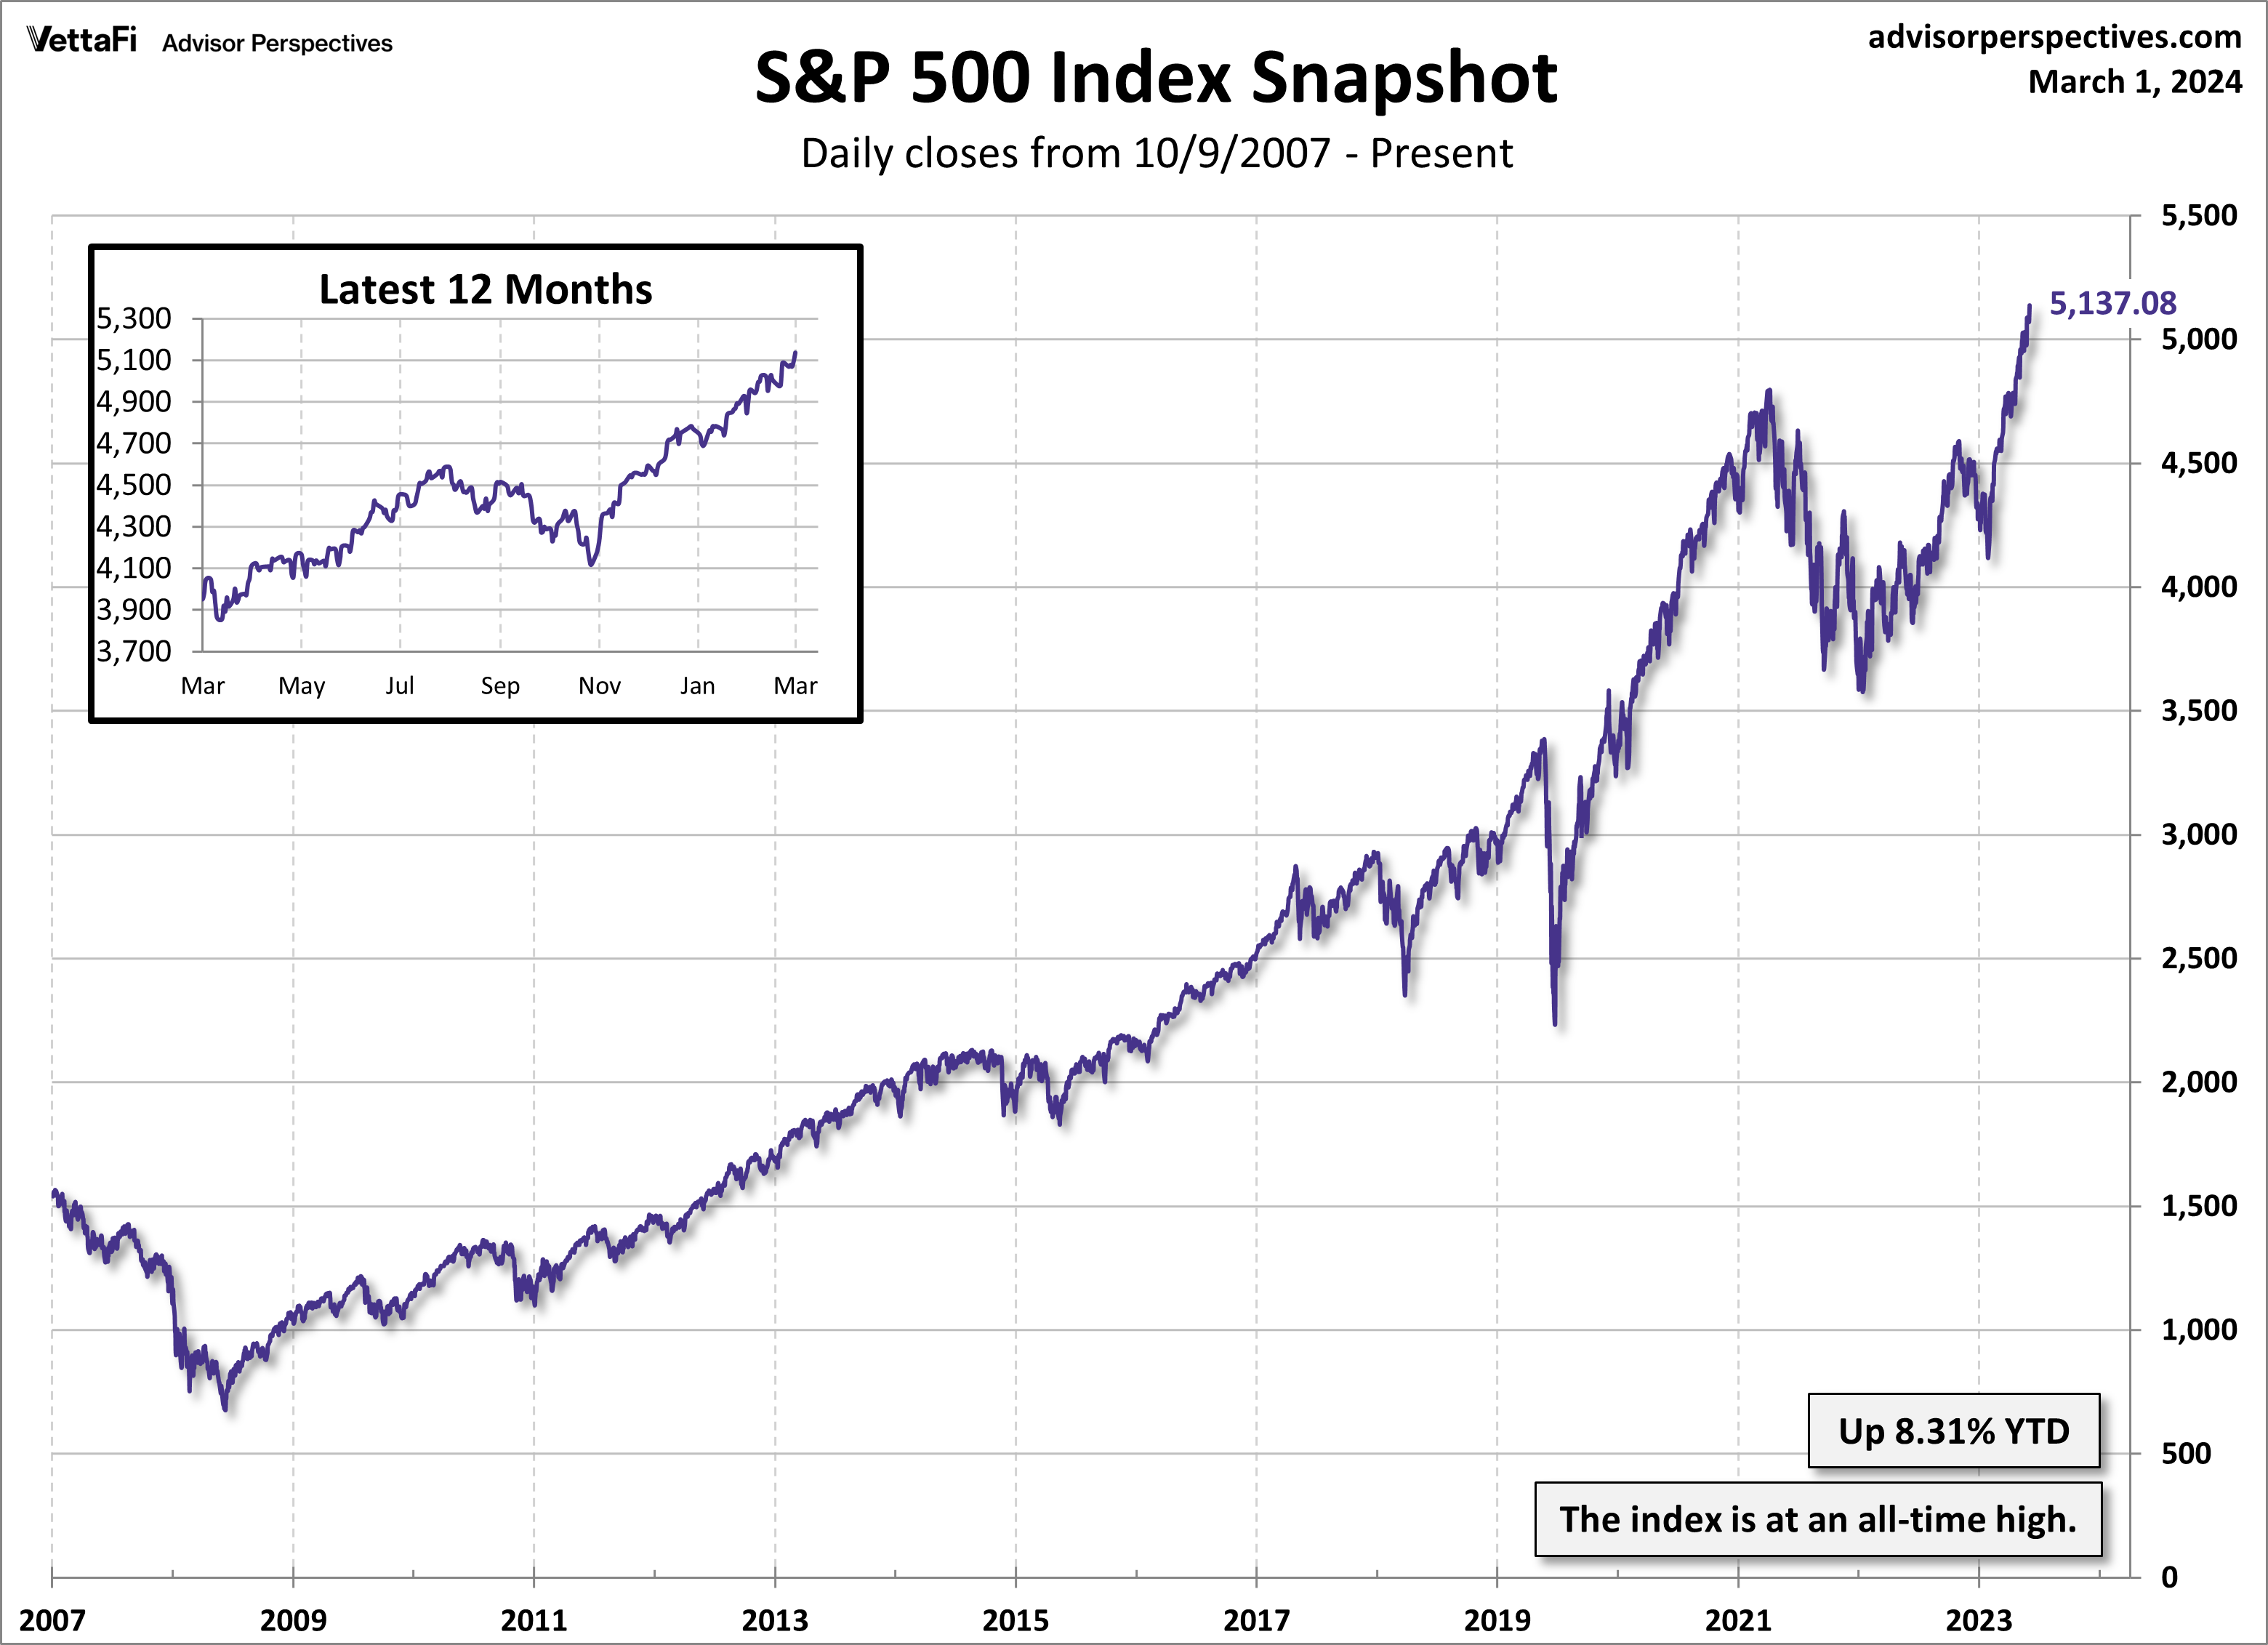 S&P 500 Index Snapshot Daily Closes from Oct. 9, 2007 - Present